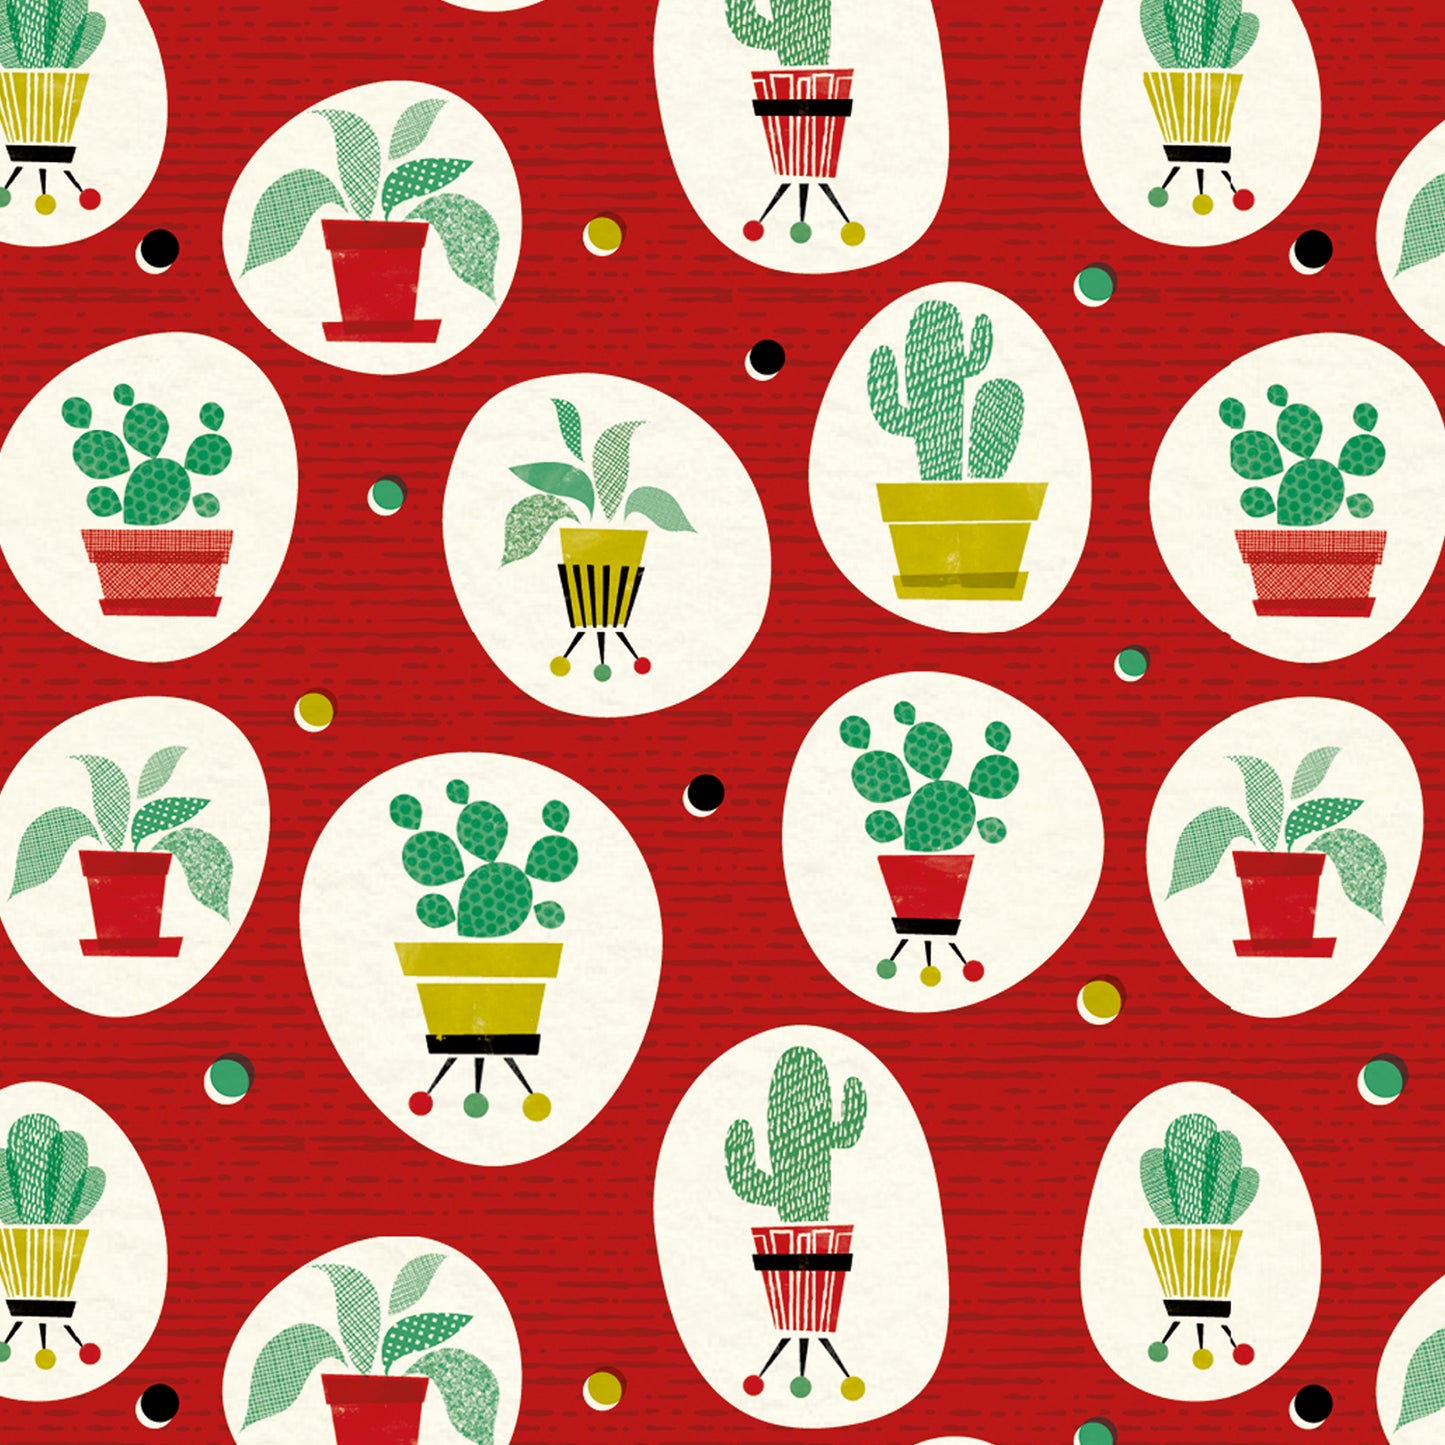 Just Patterns: Cactii, Red